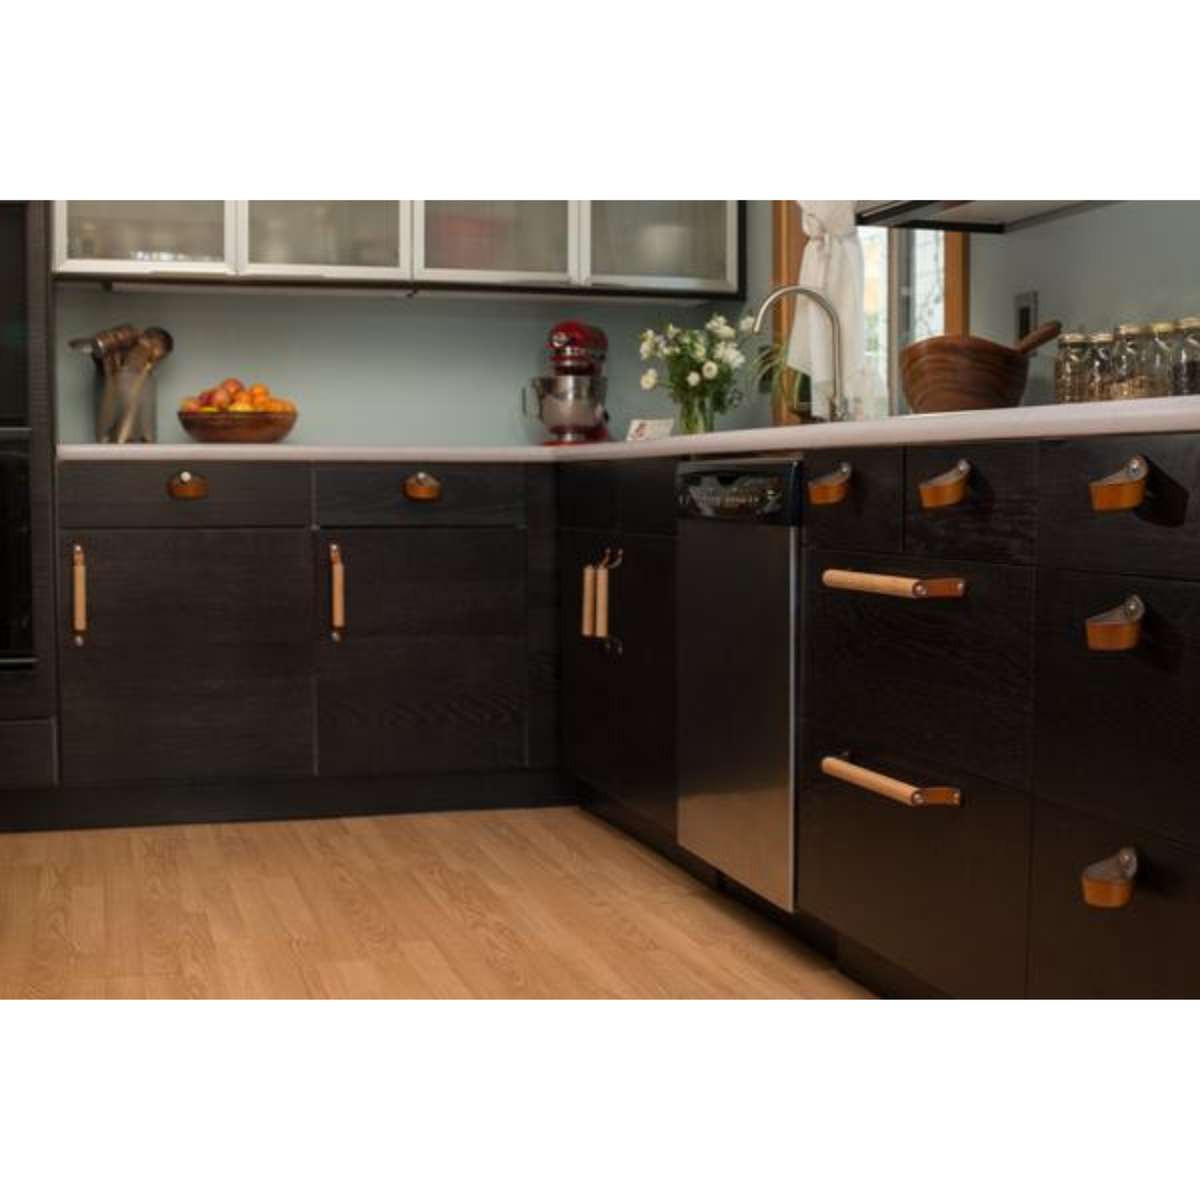 View of an entire kitchen from a distance with black brown IKEA cabinets and honey leather handles. 